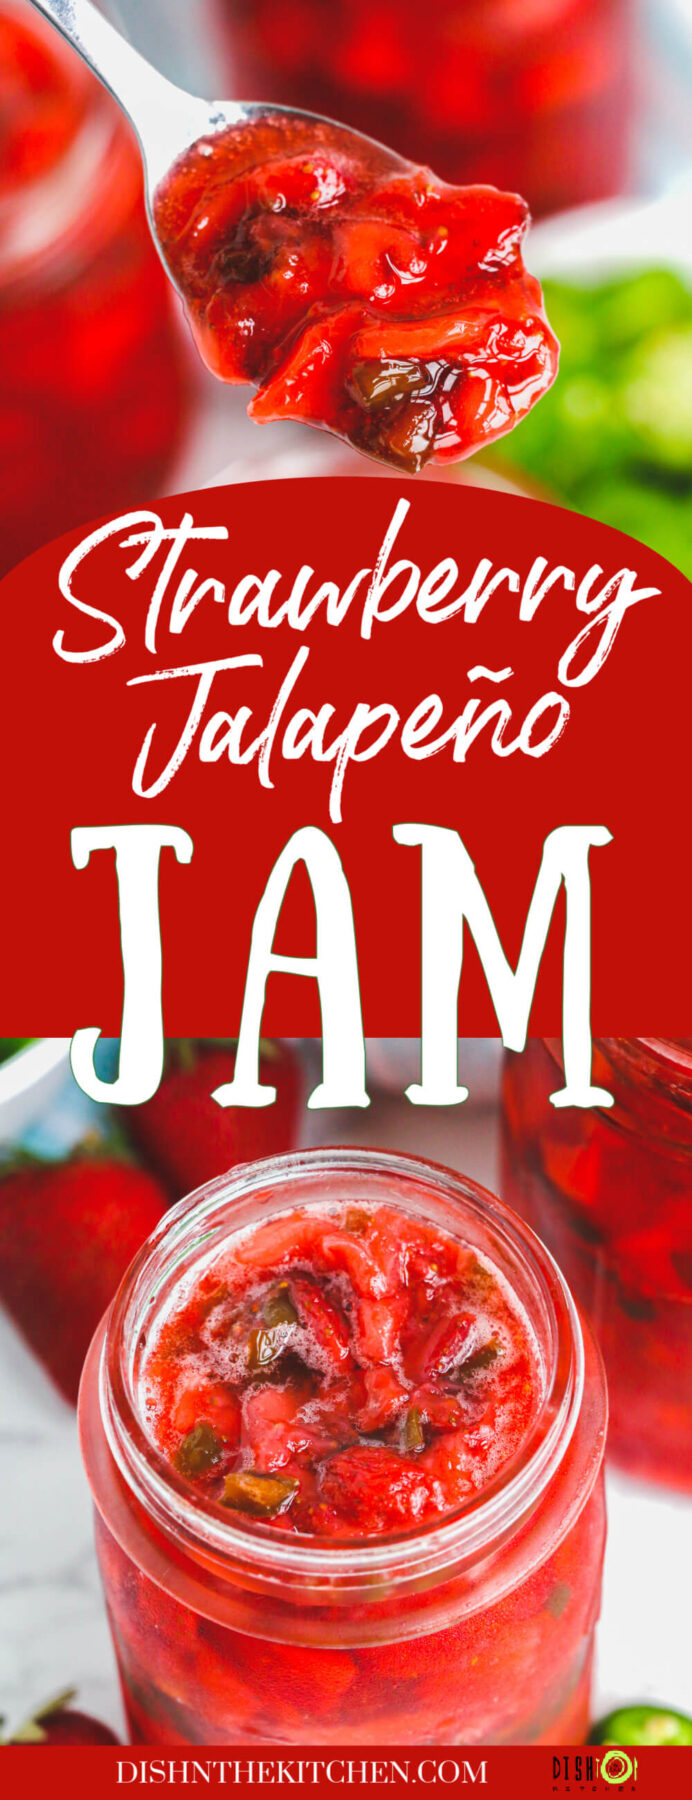 Pinterest images featuring stunning ruby red Strawberry Jalapeño Jam on a spoon and in a jar.